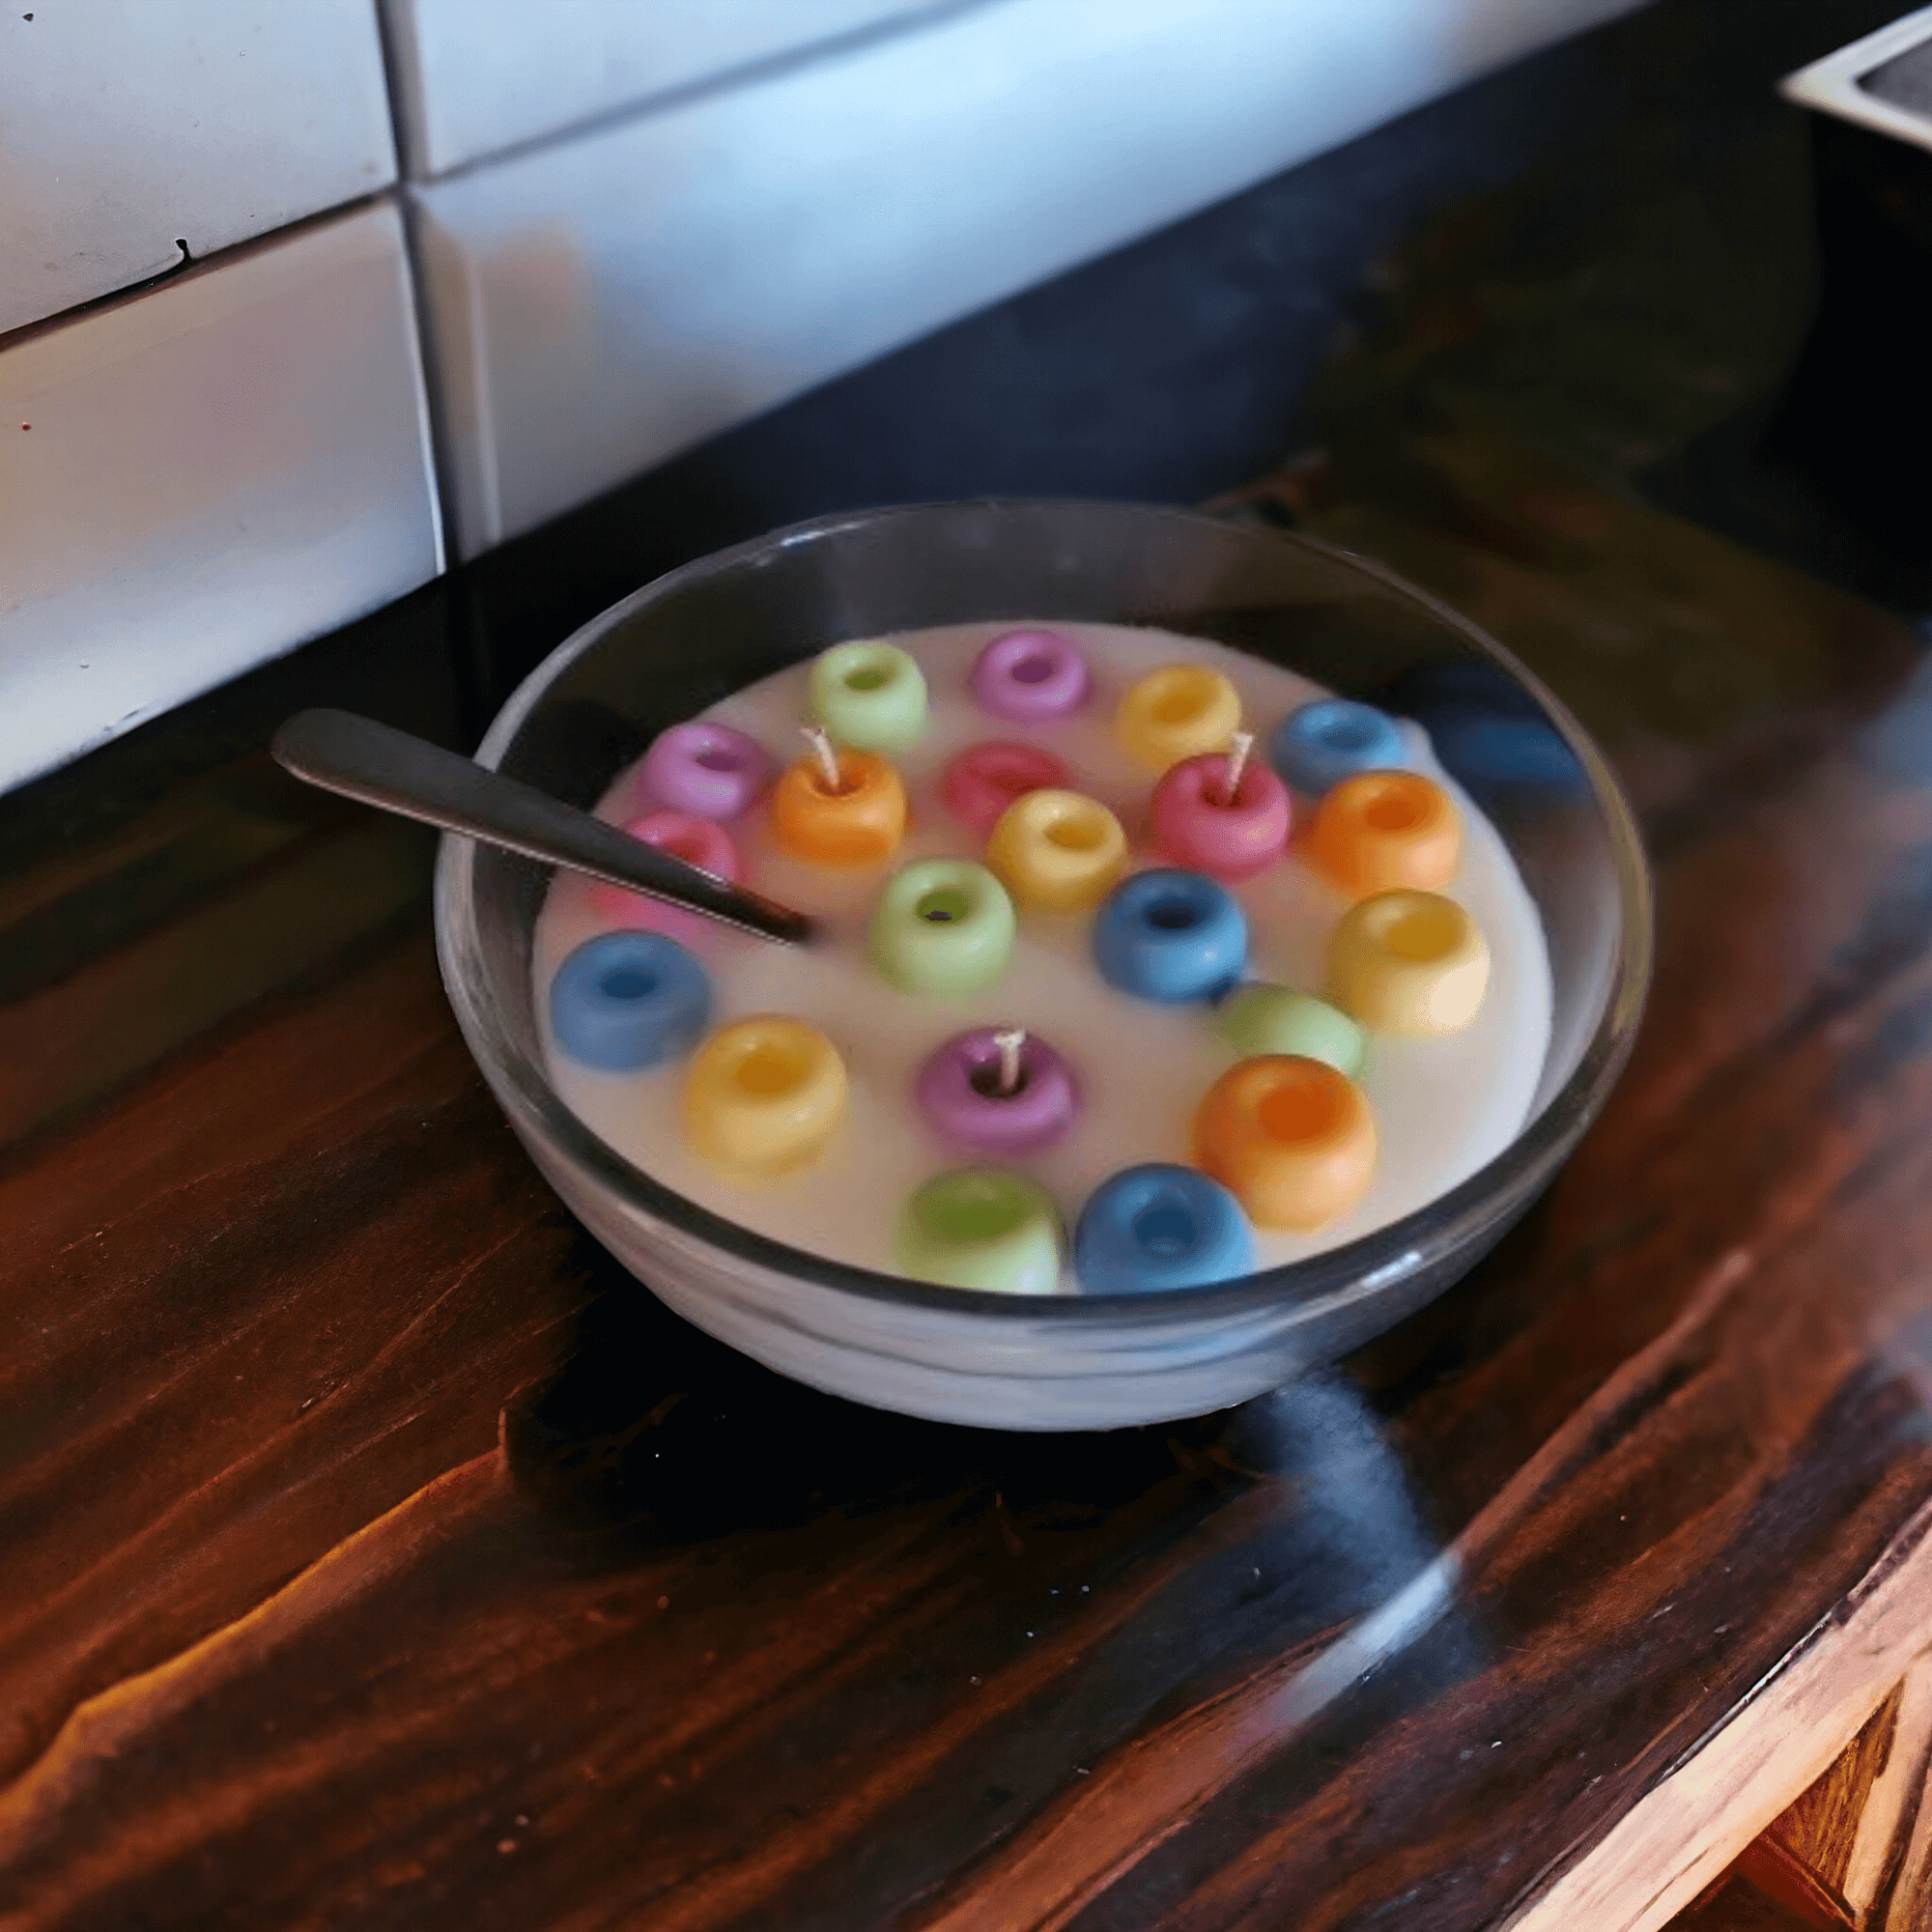 Cereal Bowl Candle - Fruit Loops Cereal Bowl candle Flamingwick Candles & Wax Melts   